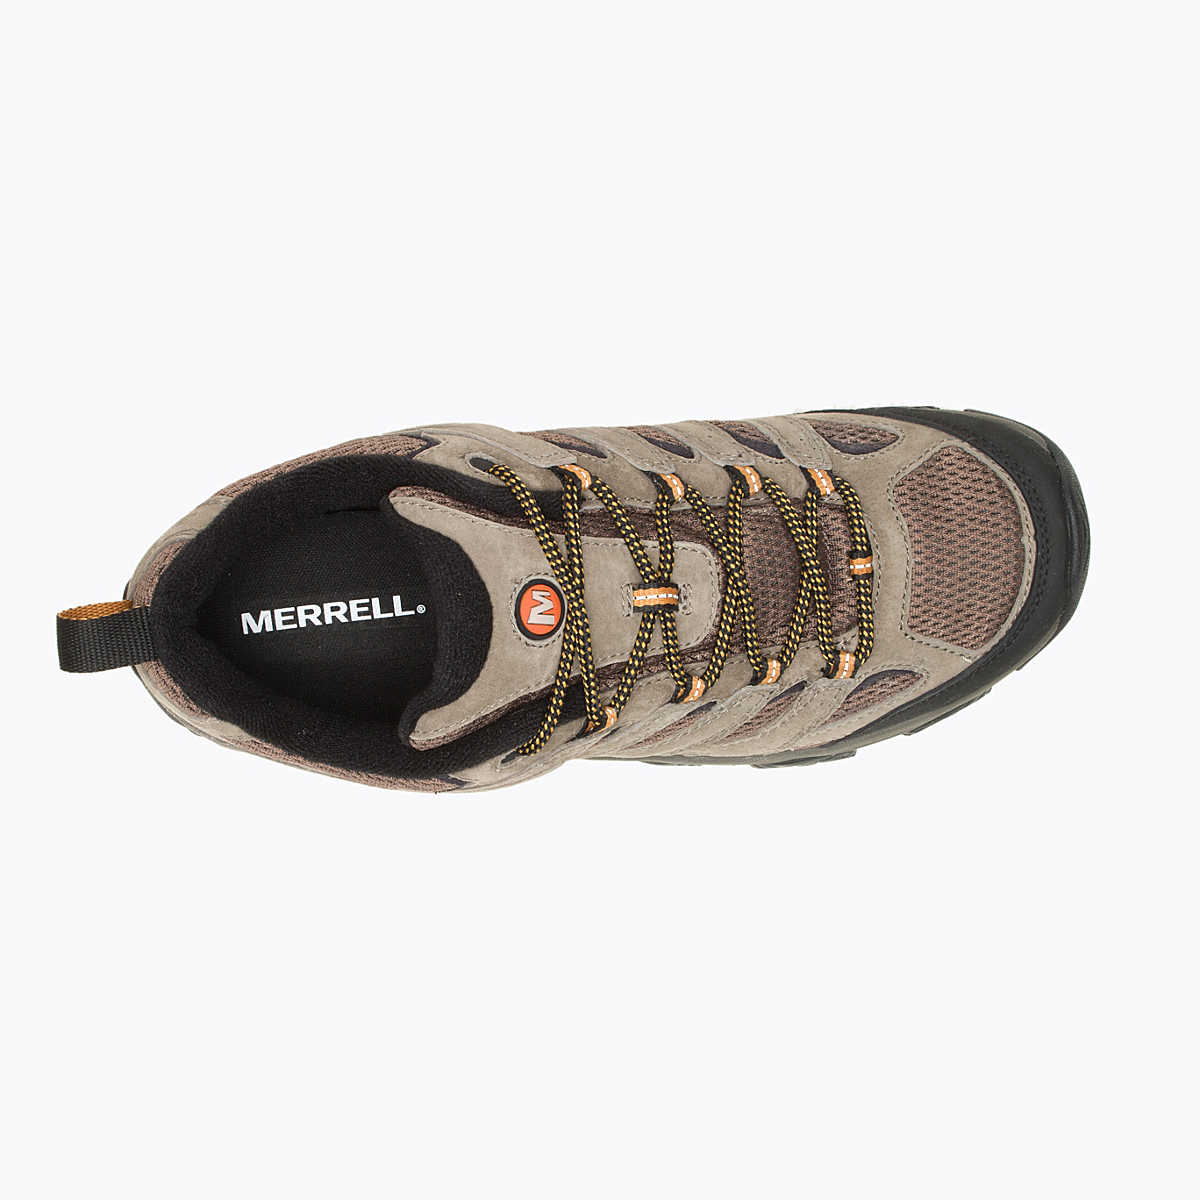 Merrell Men's Moab 3 Wide Hiking Shoes